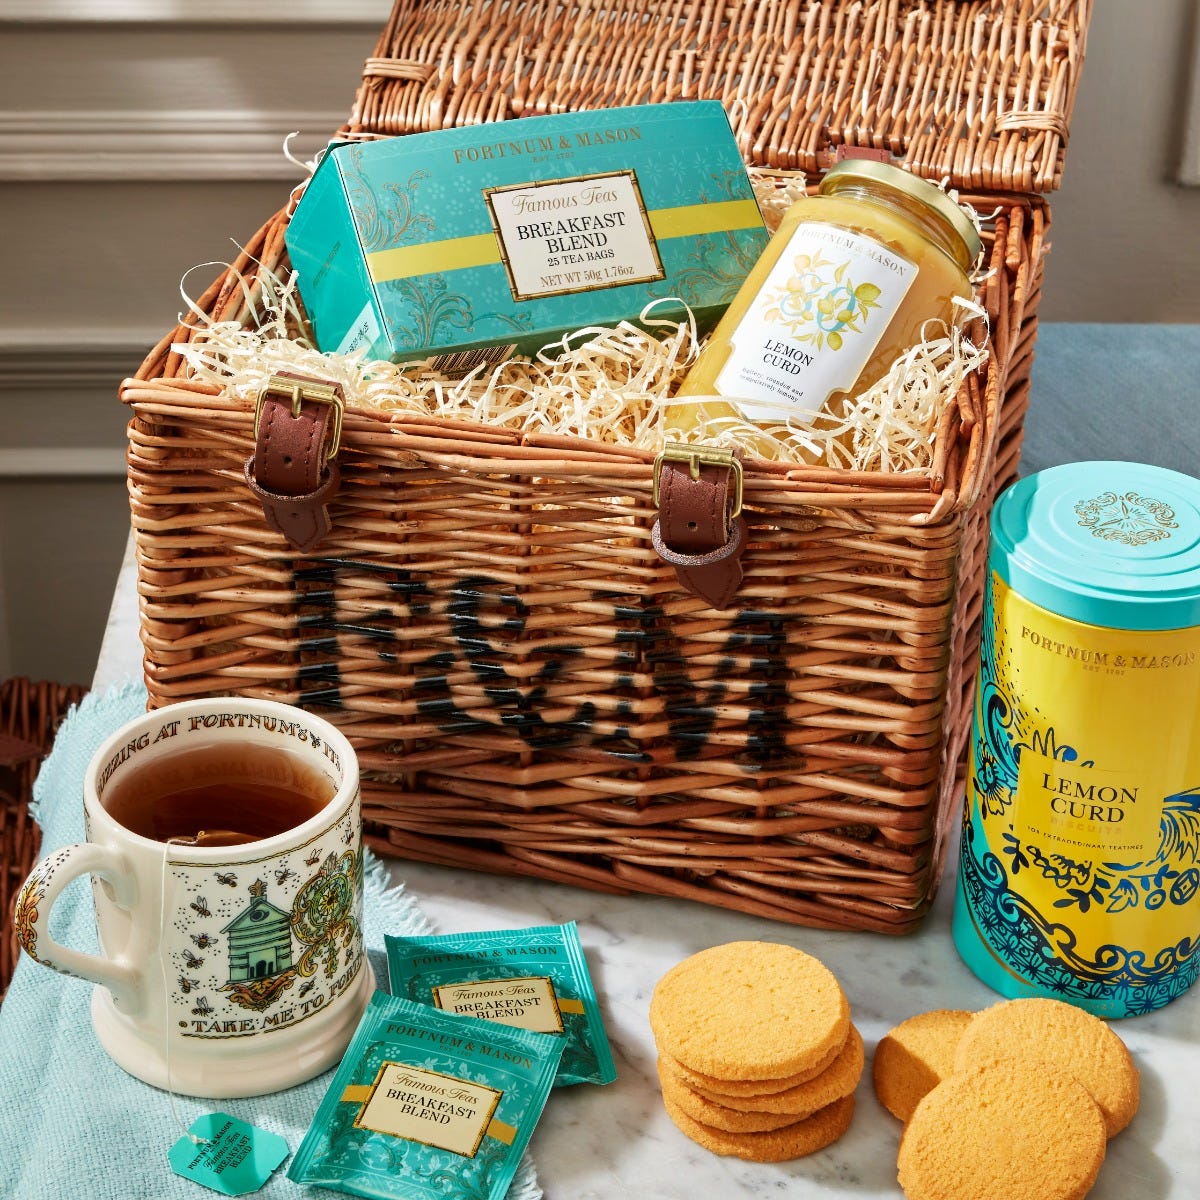 The Take Me to Hamper, Biscuits, Teas, Fortnum & Mason